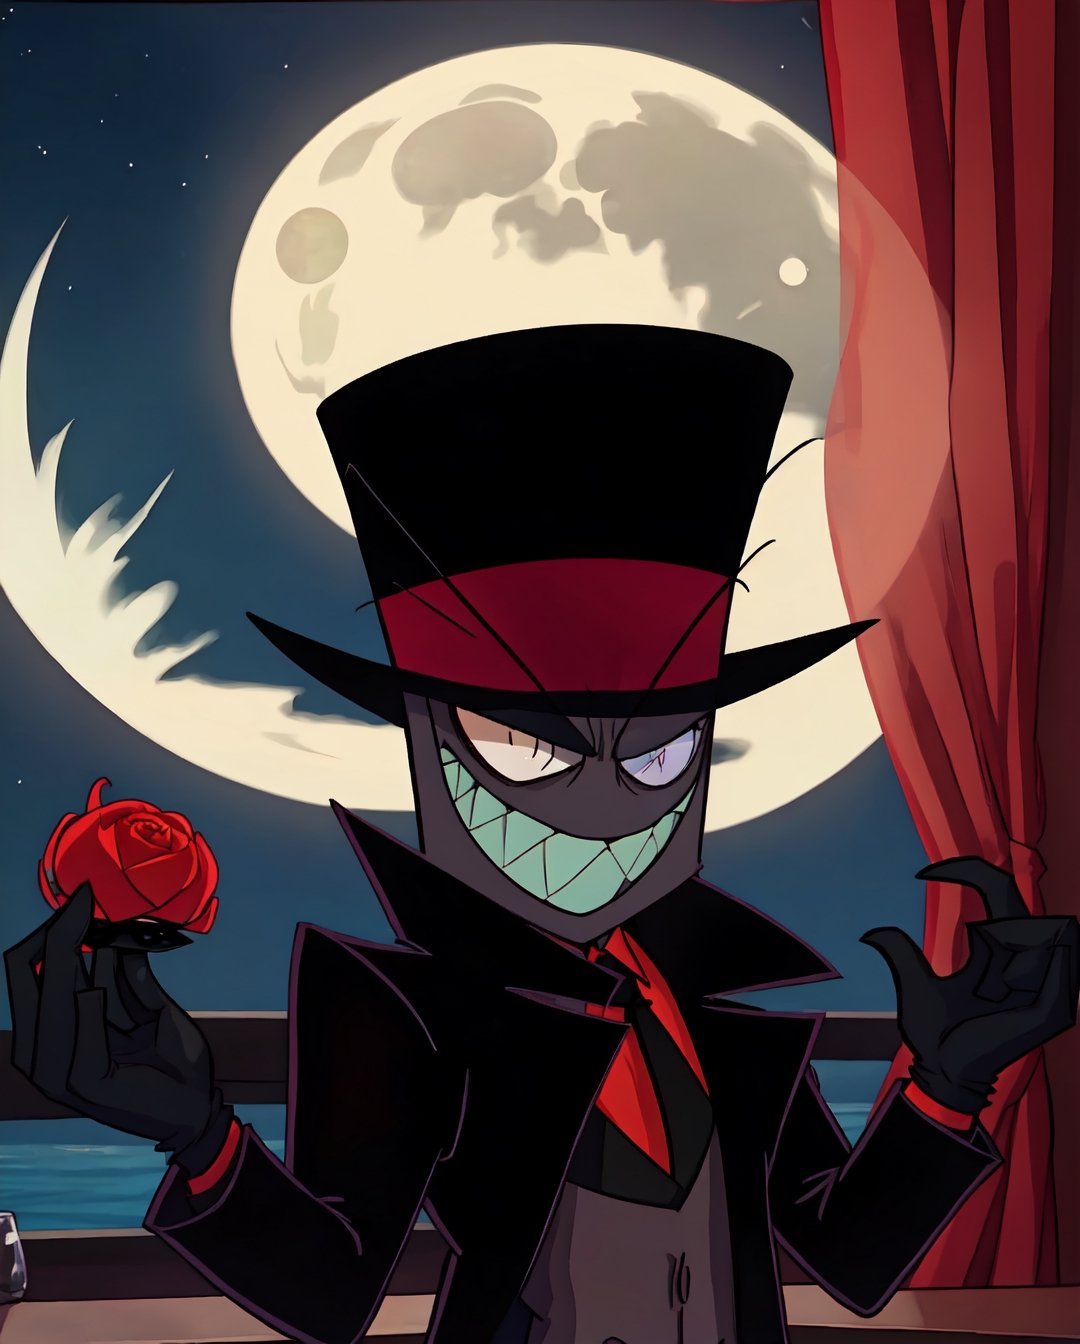 1 man, smiling, sharp teeth, top hat, discolored skin, monocle in left eye, red long-sleeved shirt, black tie, black cane in right hand, looking at viewer, 4k quality, artwork, moon background red reflected in the window, ultra detailed